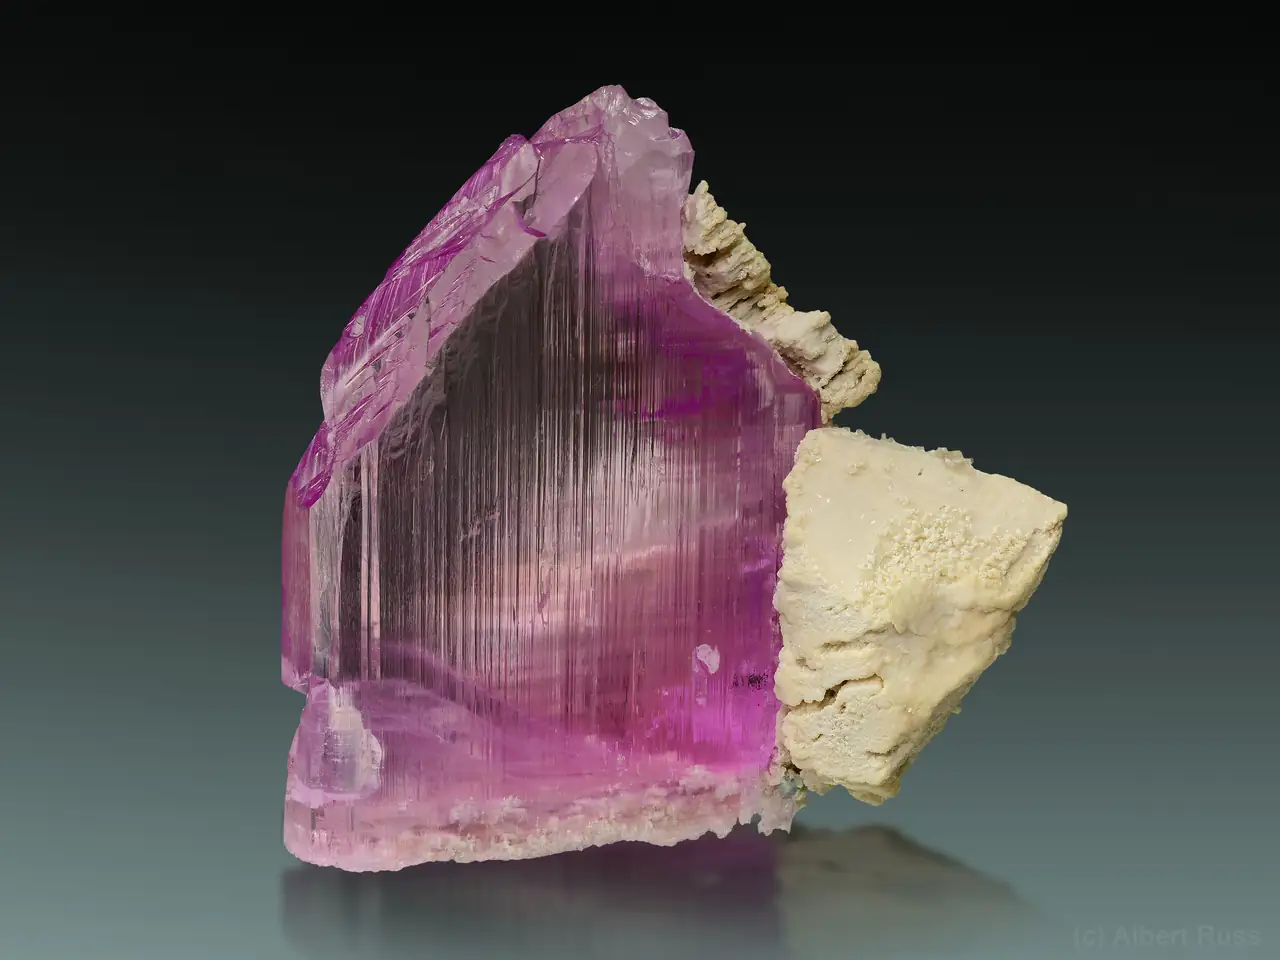 Classic pink kunzite (variety of spodumene) with dolomite from Dara-i-Pech, Afghanistan